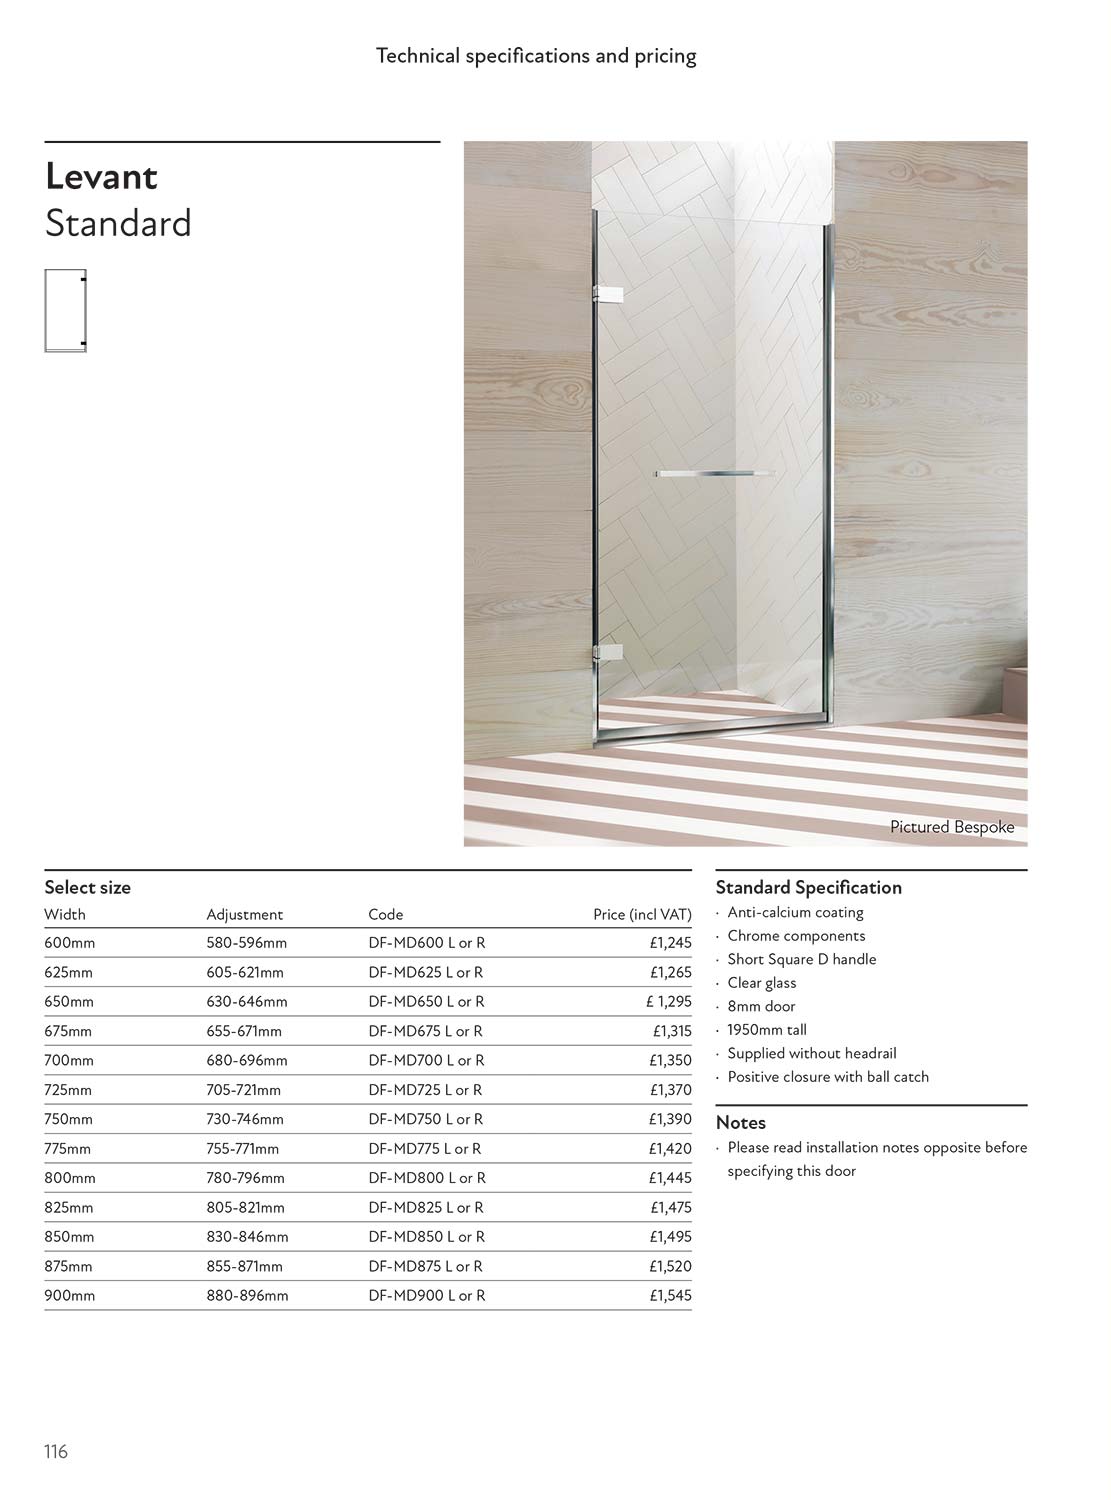 Levant Standard specification